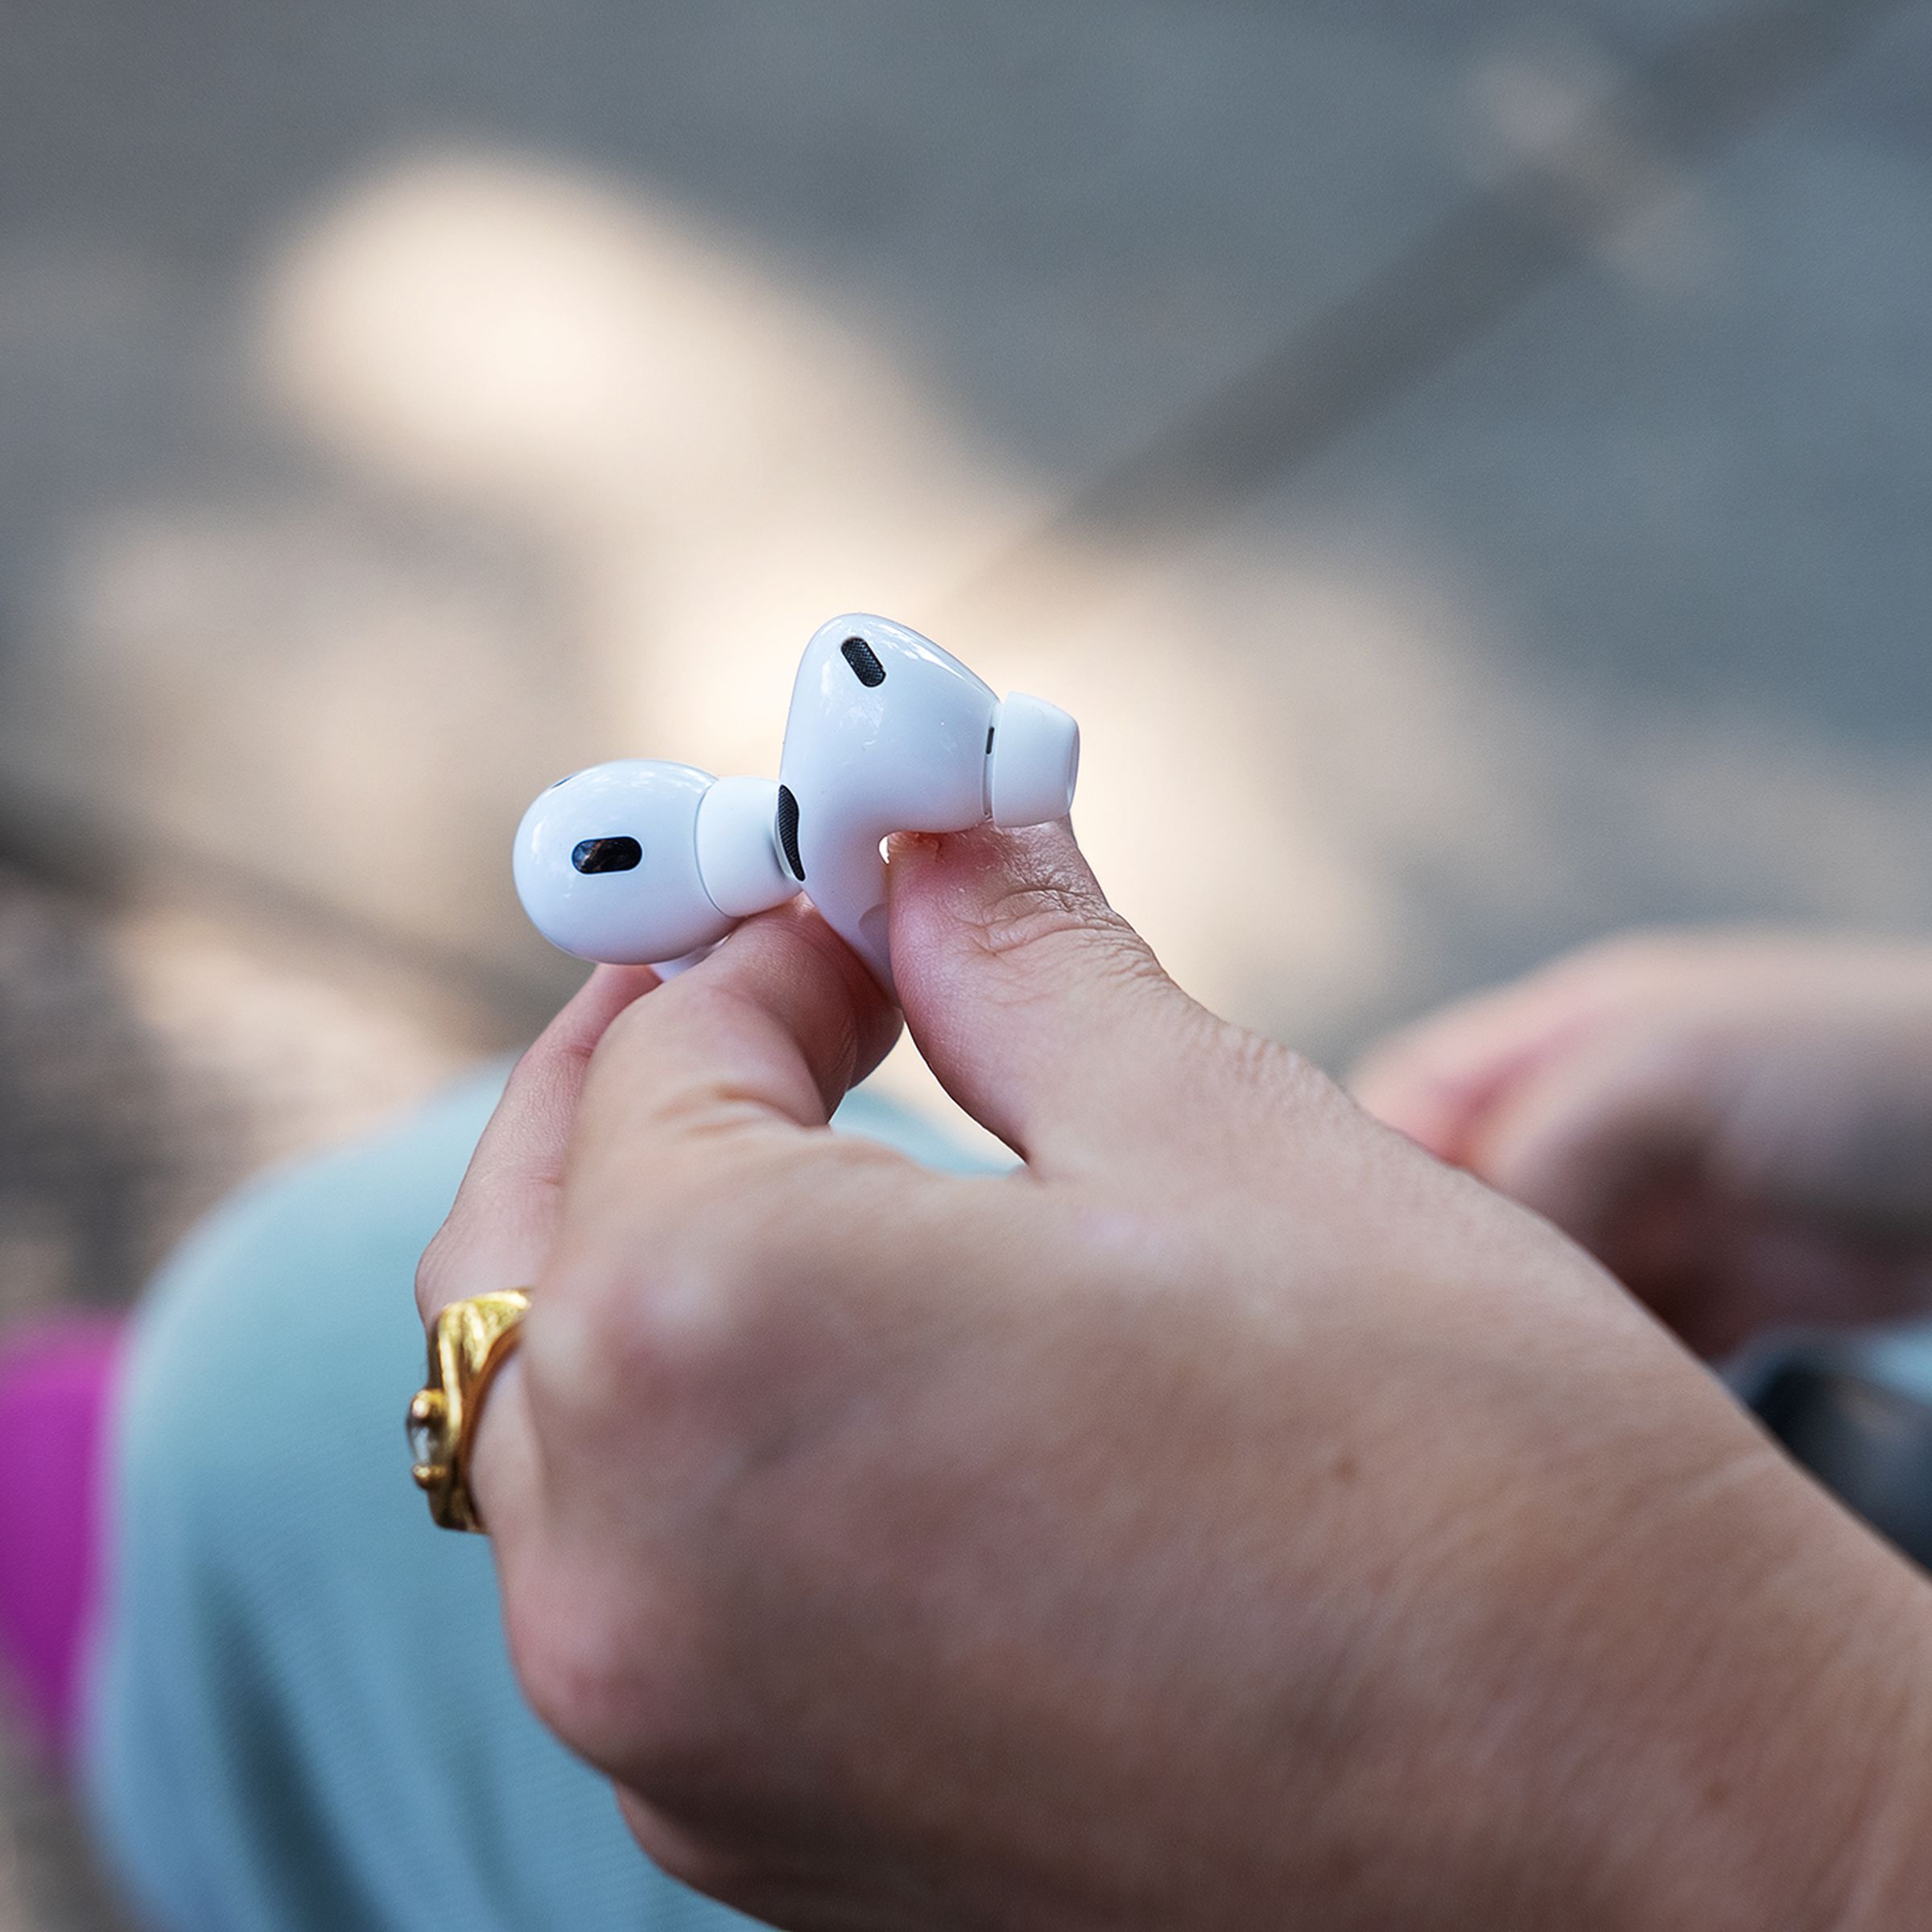 A person holds two AirPods Pro earbuds in their hand.